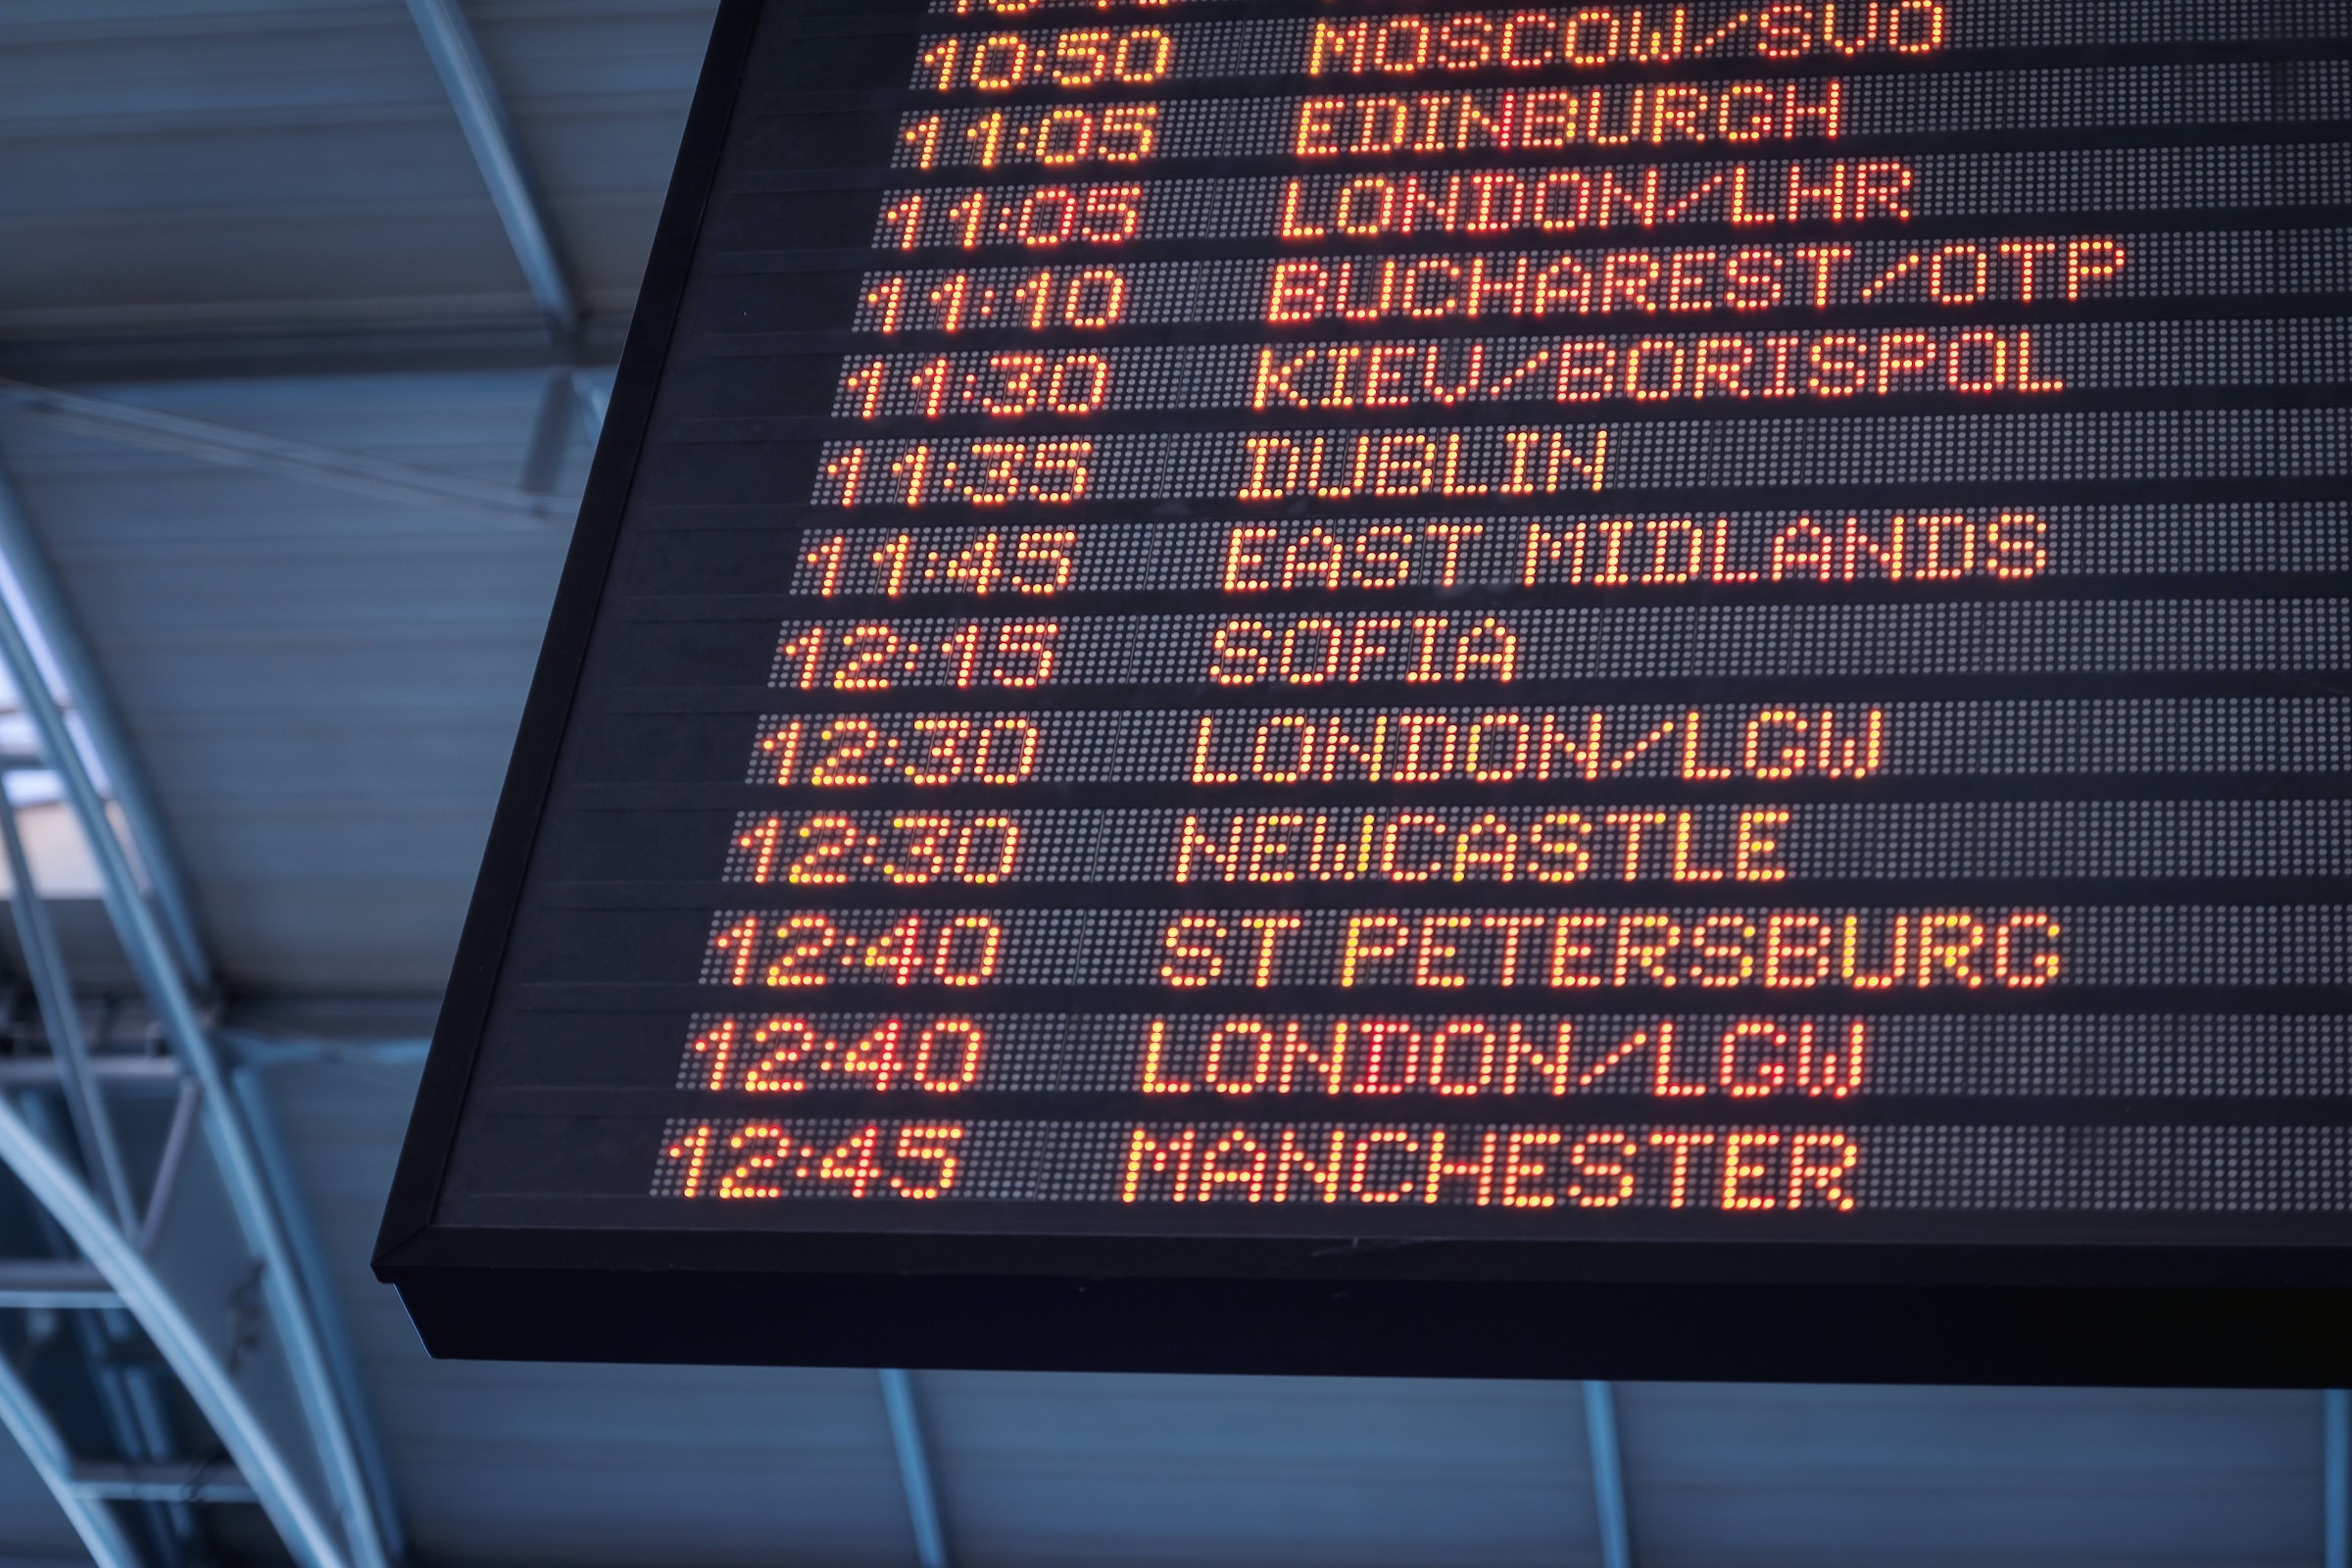 A departure board with orange LEDs on black. It shows a list of cities with departure times.